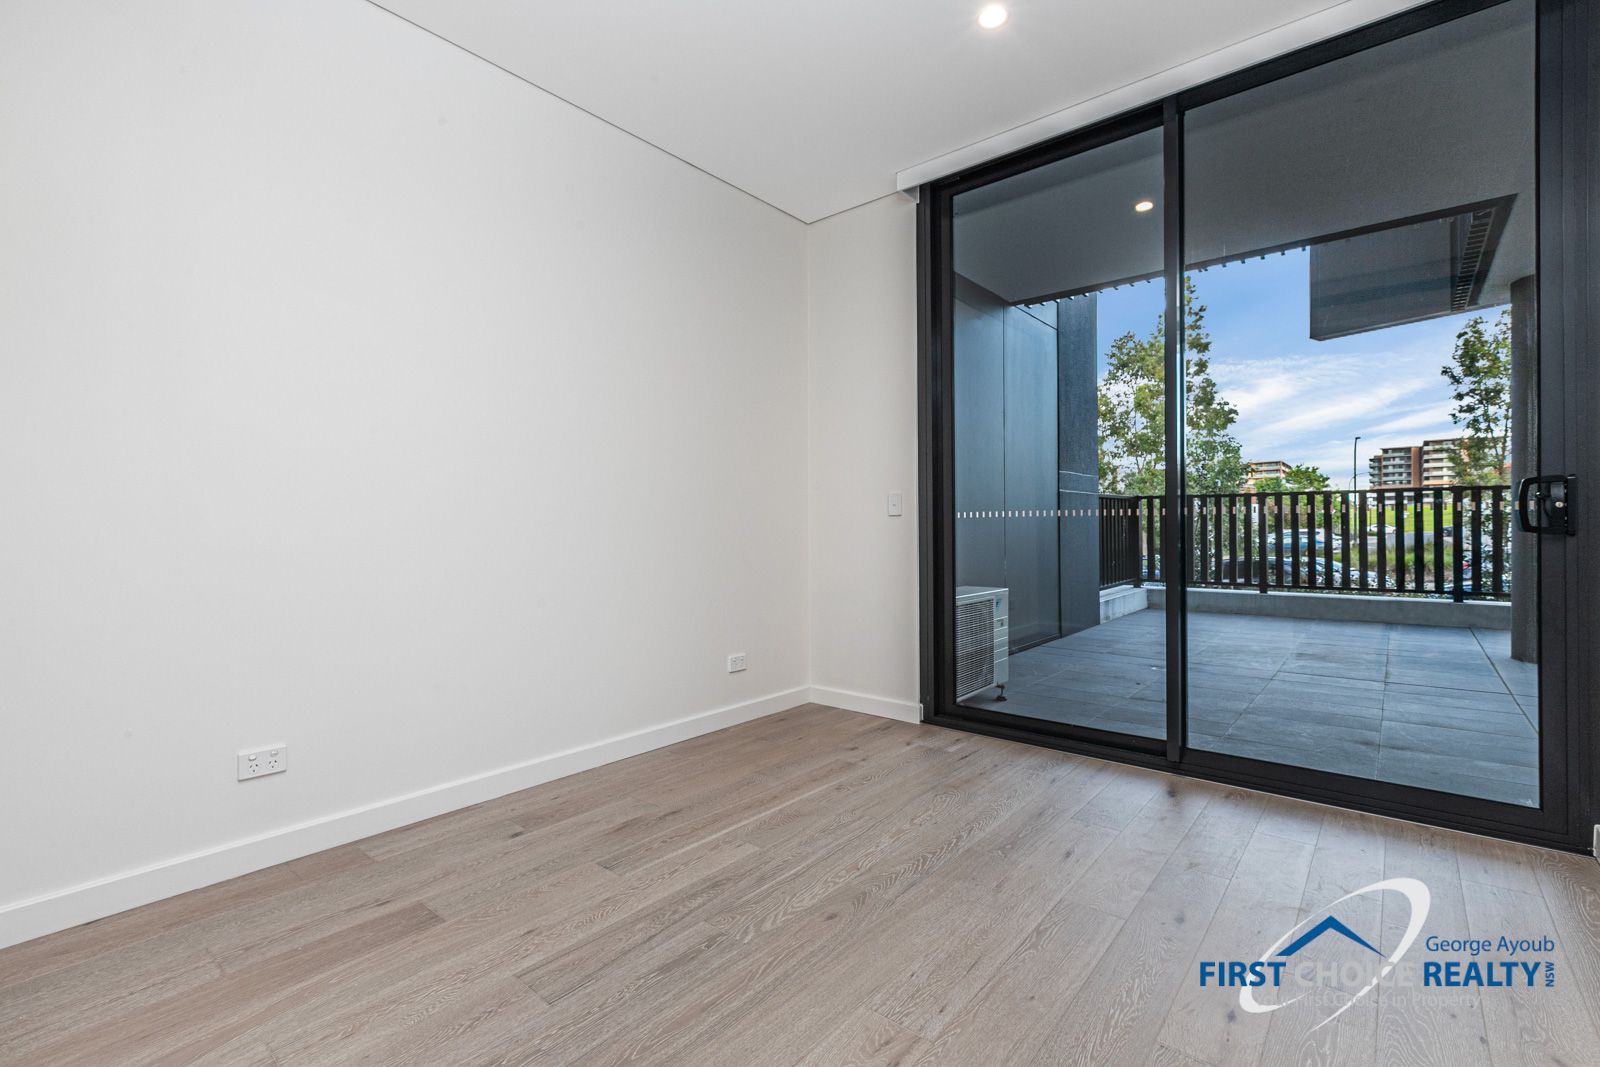 2 bedrooms Apartment / Unit / Flat in LG G10/76 Cudgegong Road ROUSE HILL NSW, 2155